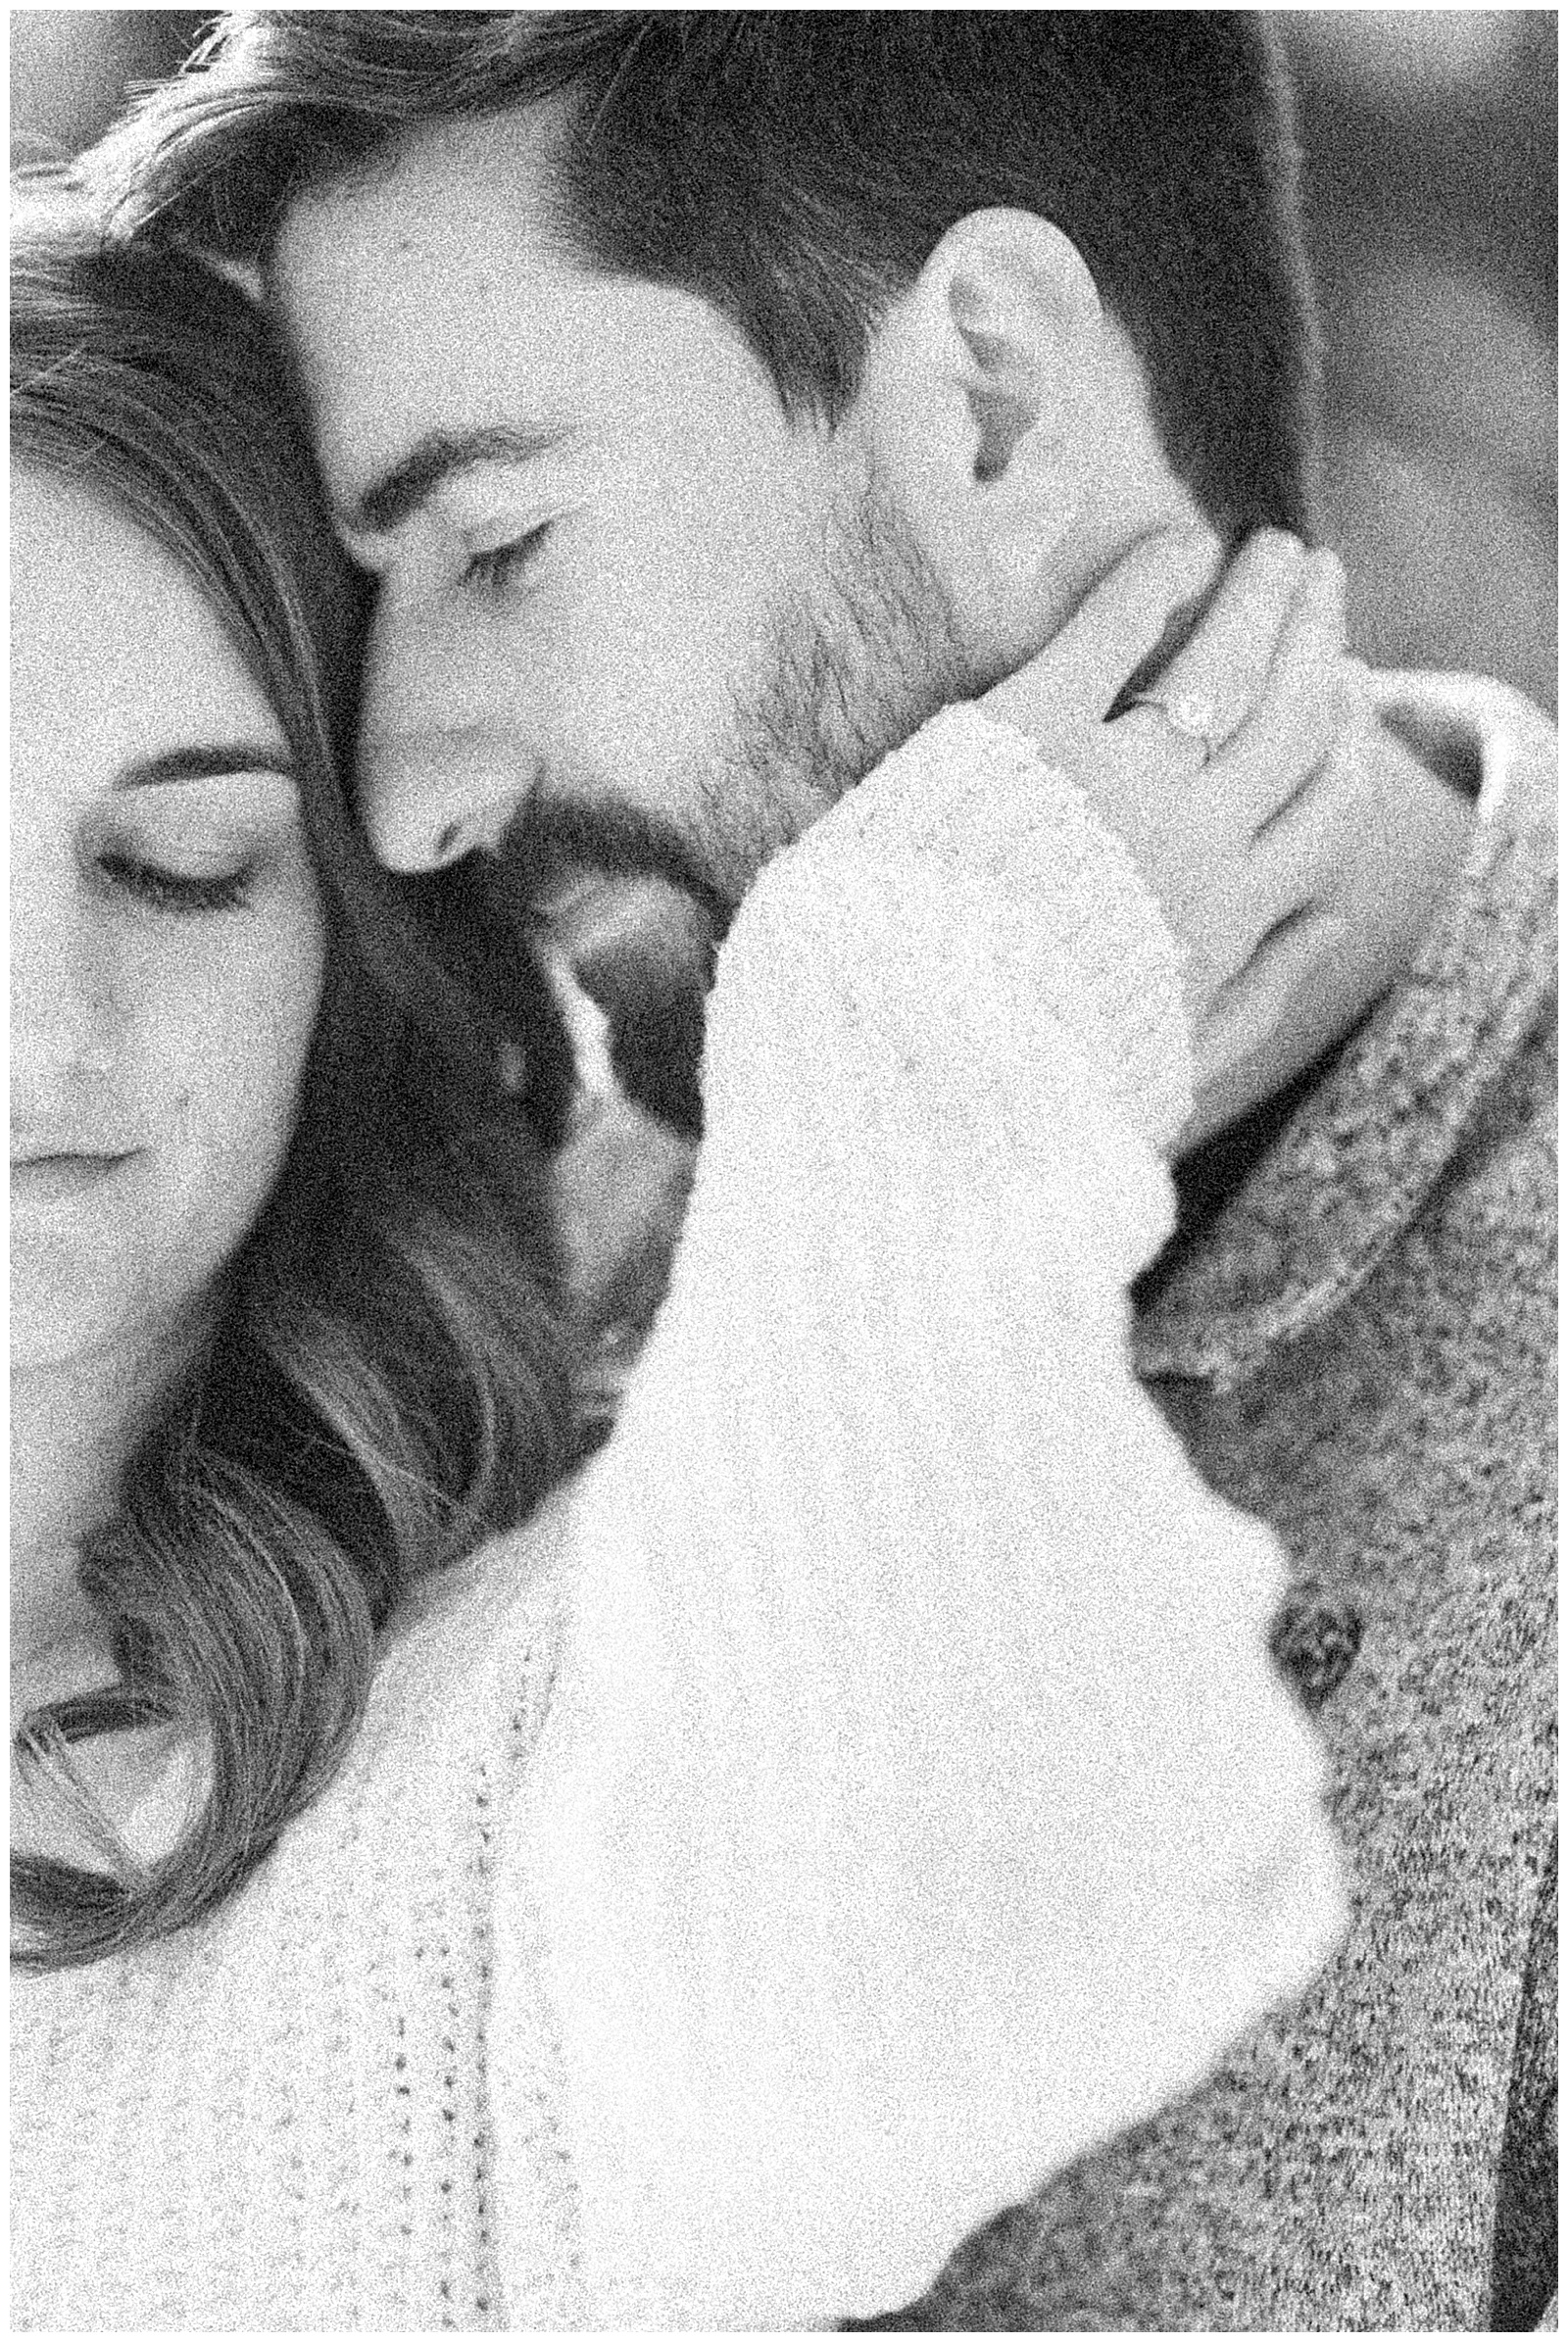 close up couple embracing black and white grainy